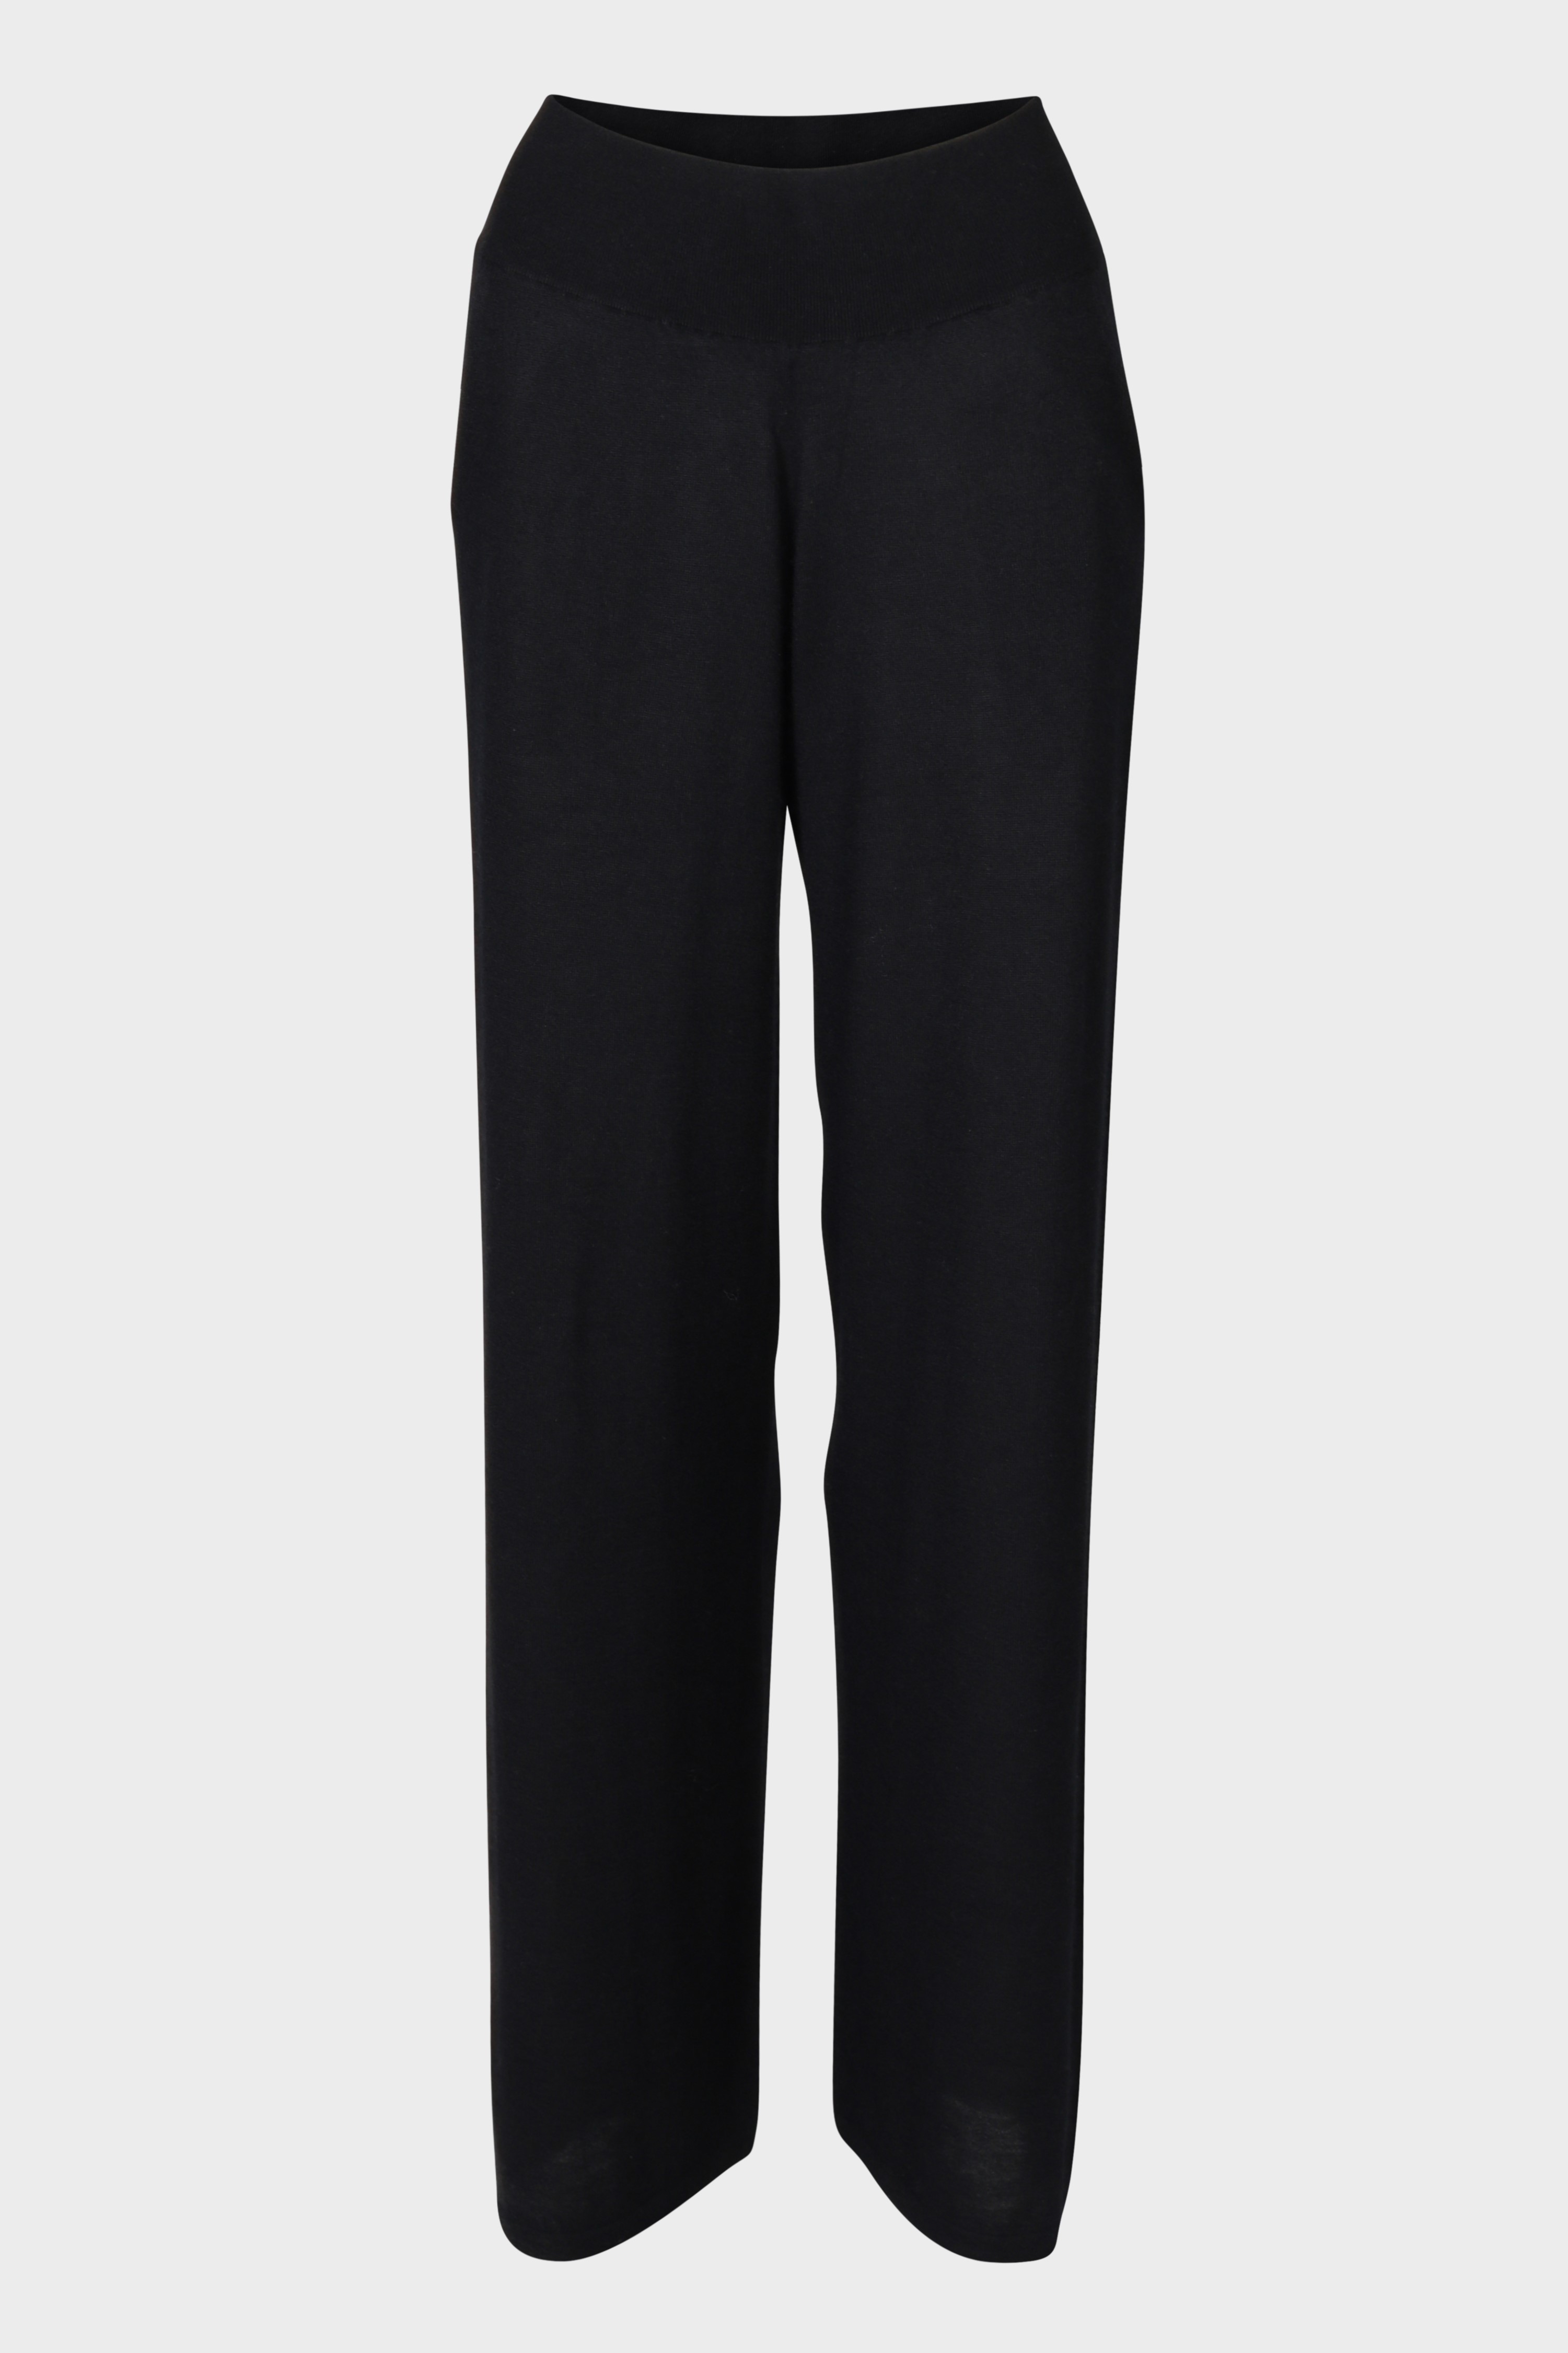 FRENCKENBERGER Straight Pants in Black L